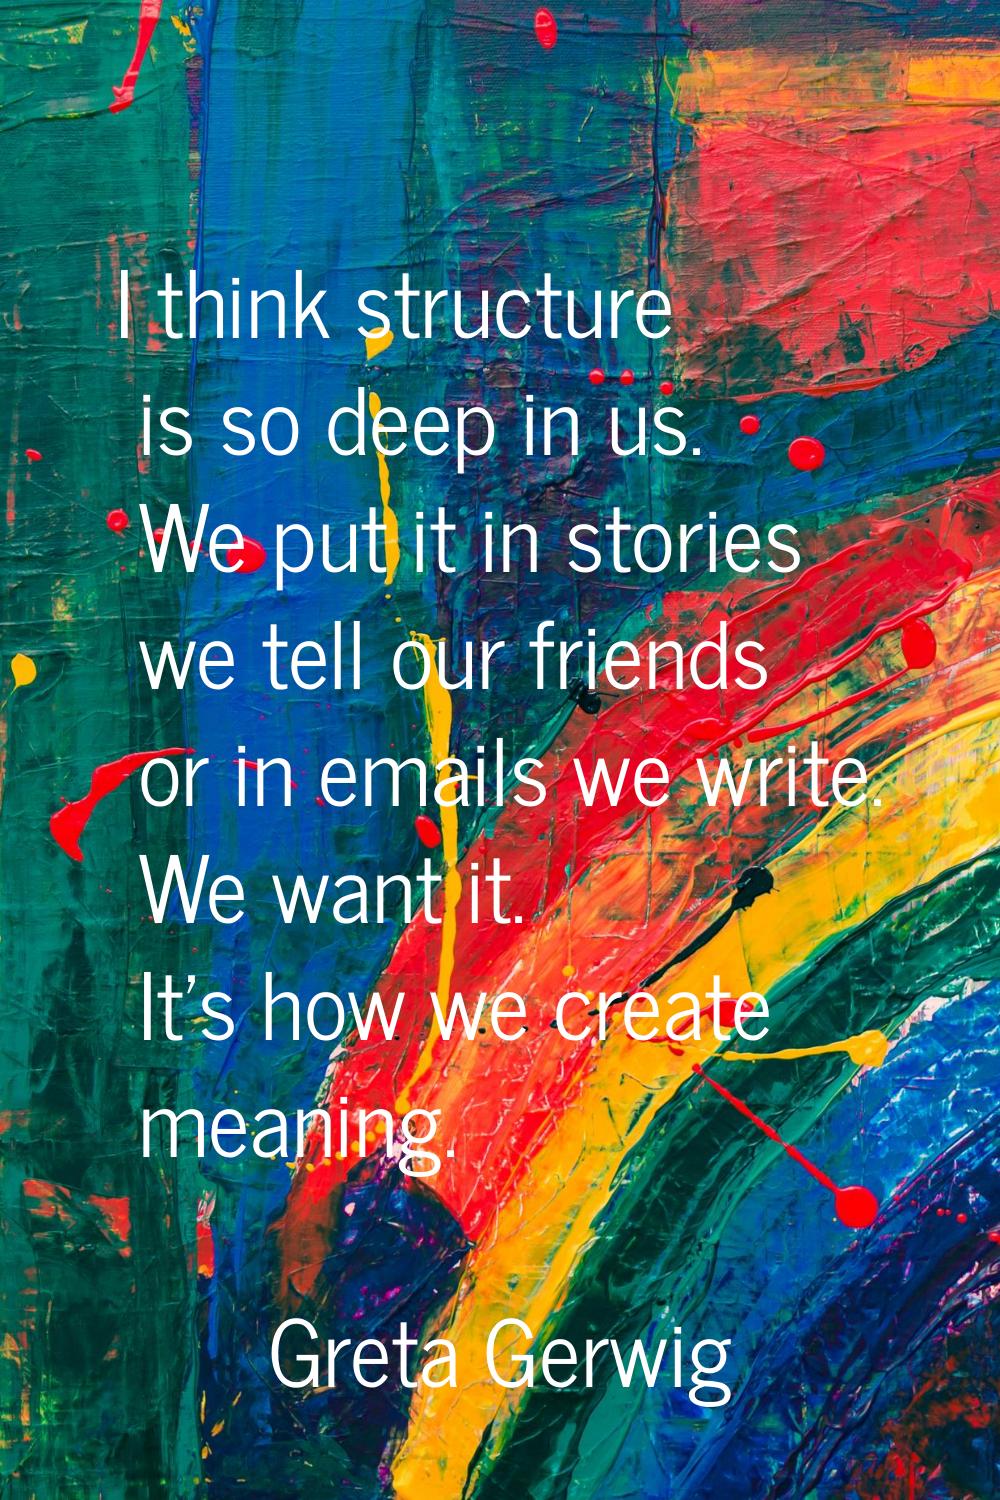 I think structure is so deep in us. We put it in stories we tell our friends or in emails we write.